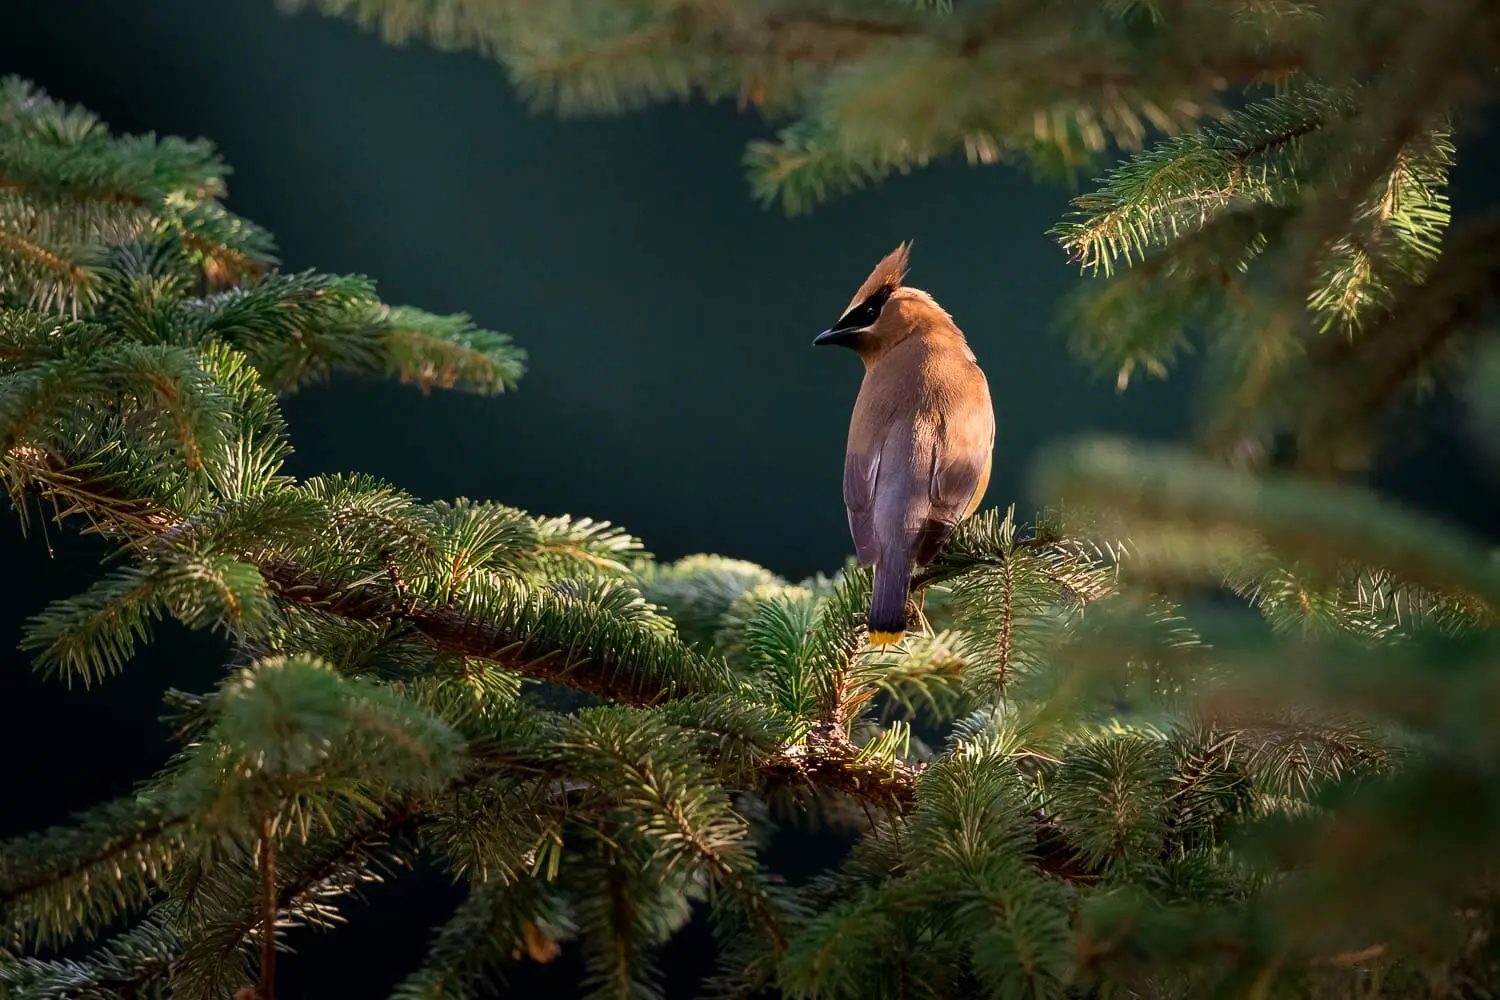 Cedar waxwing perched on a pine branch in the sunlight.